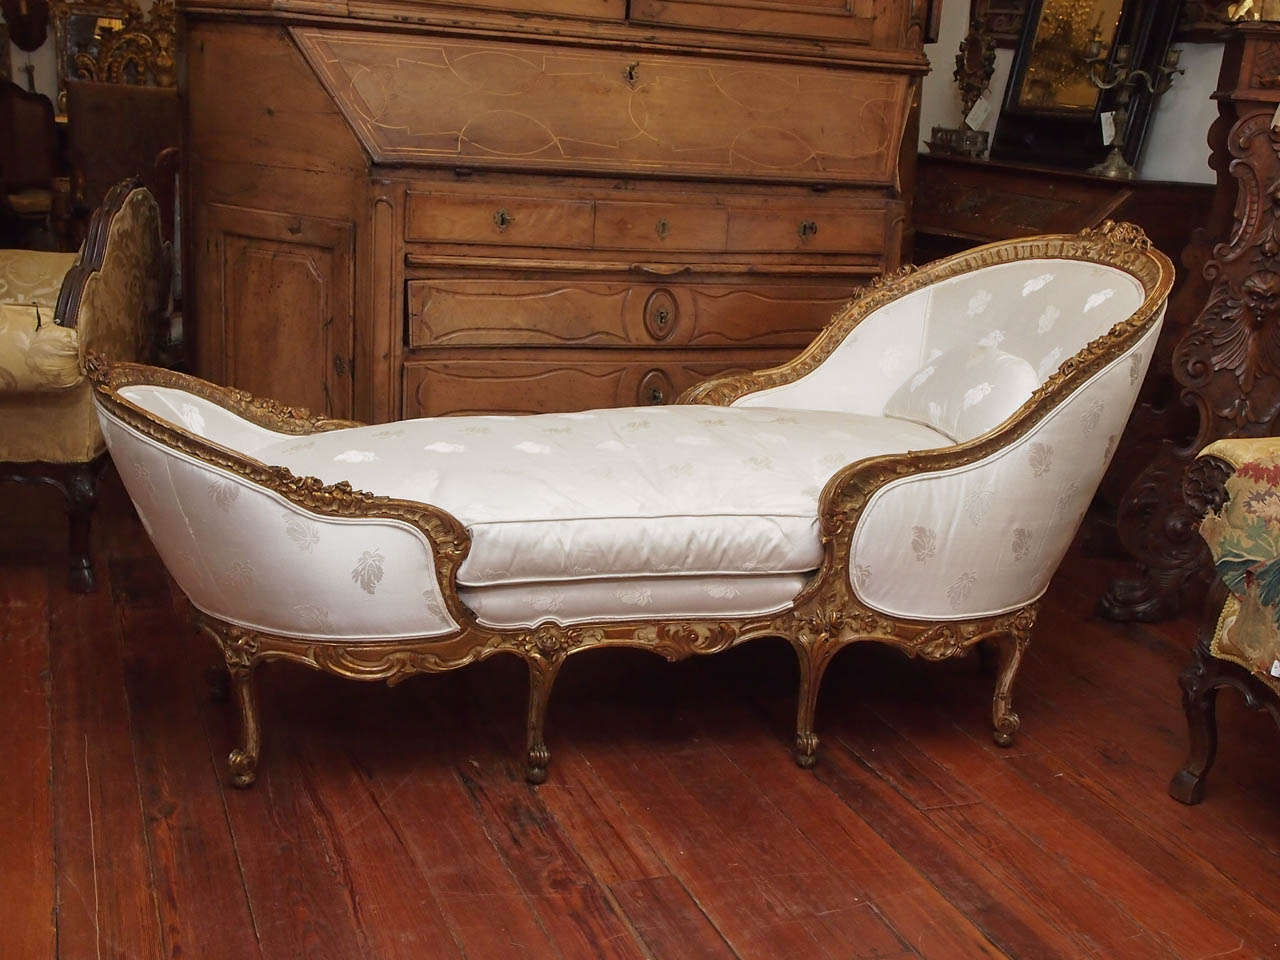 19th century giltwood Louis XV style gondola style chaise longue
exceptional carving.